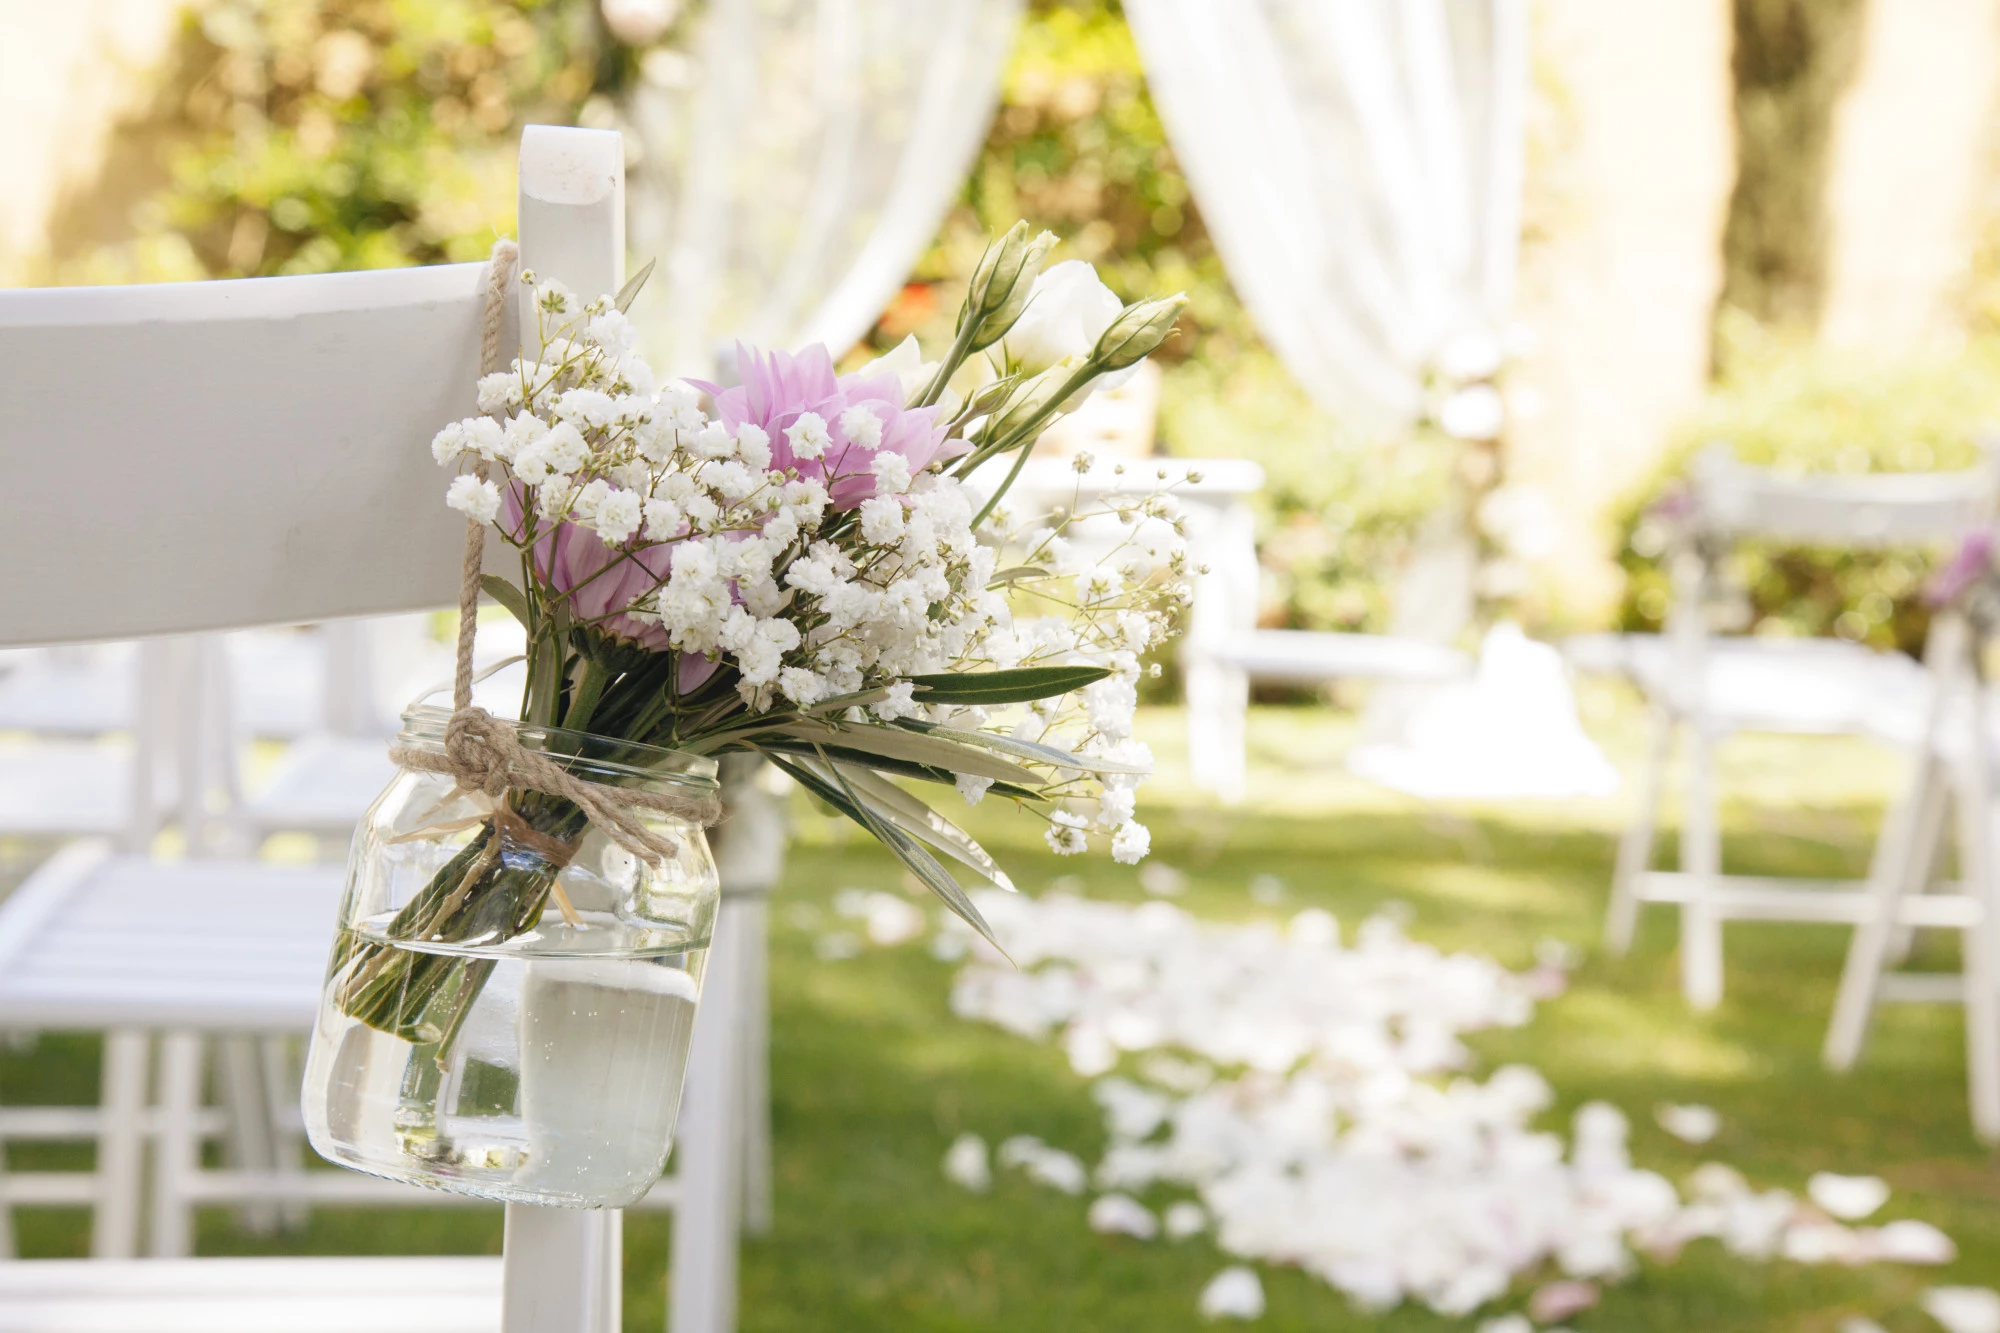 The Do's and Don'ts of Planning an Outdoor Wedding